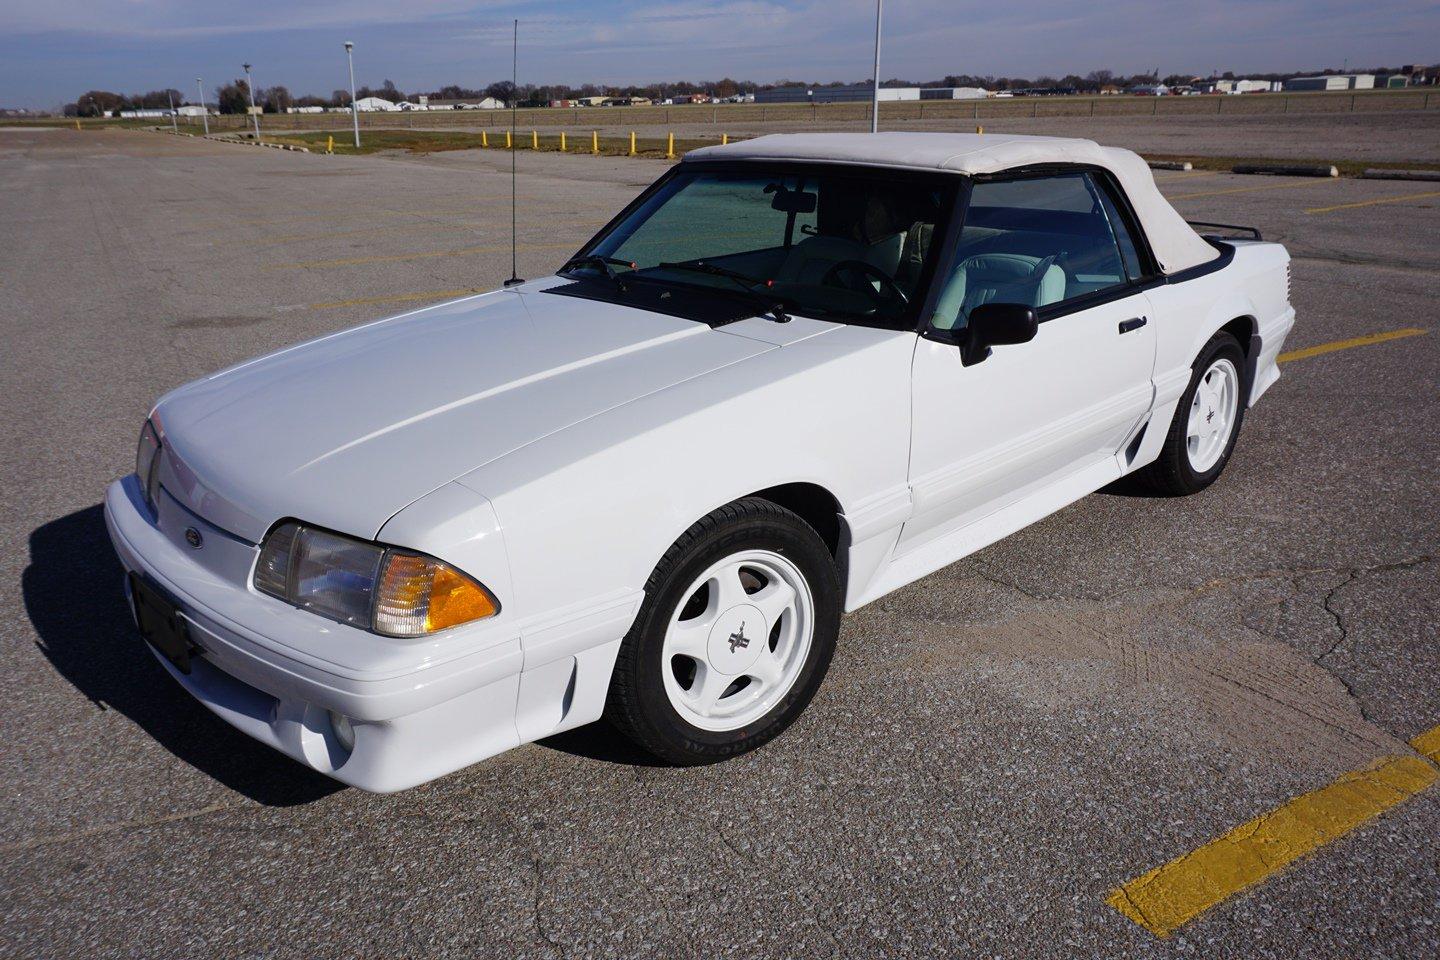 1992 Ford Mustang GT Convertible, VIN #1FACP45E9NF106400, 5.0 Liter V-8 Gas Engine, Automatic Transm